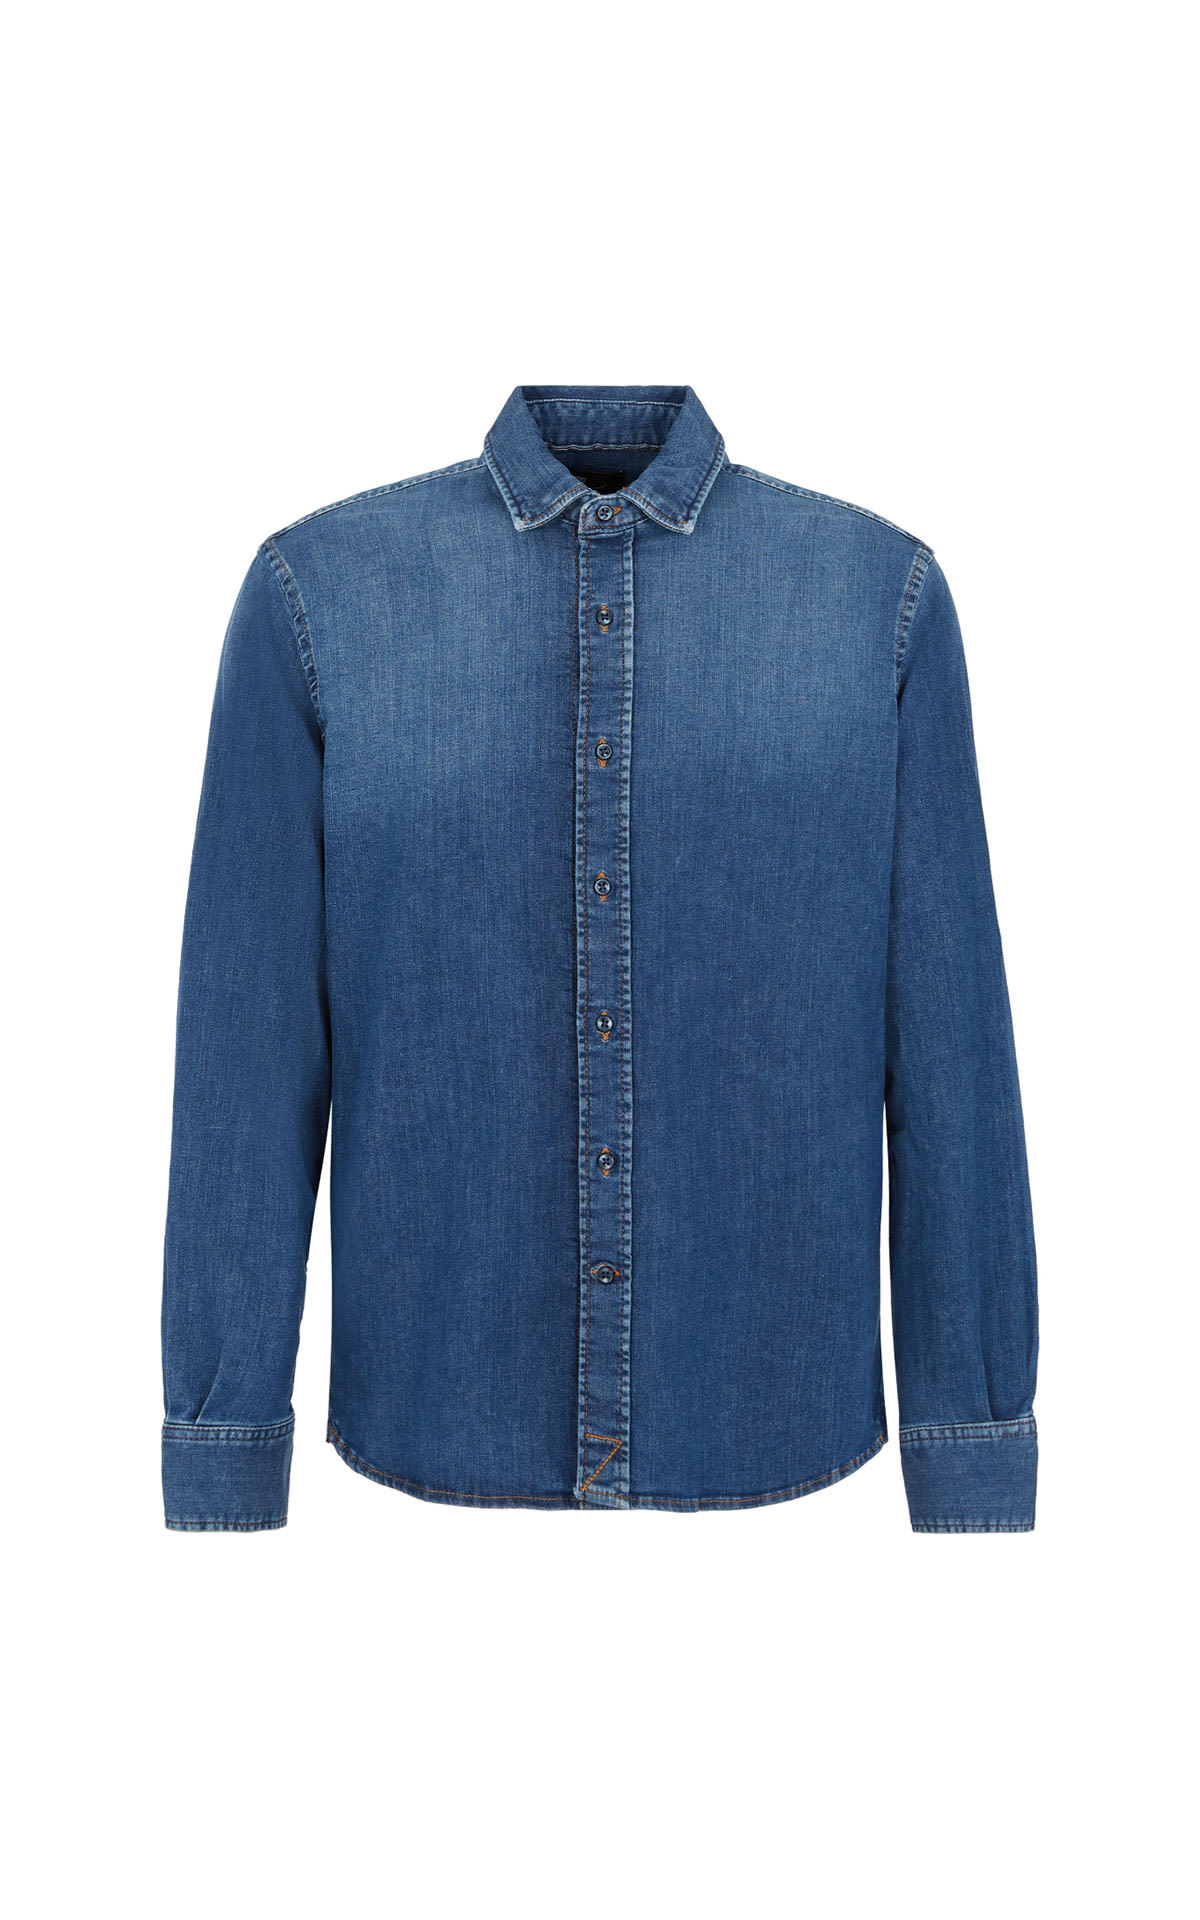 7 For All Mankind Plain shirt lux per mid blu from Bicester Village